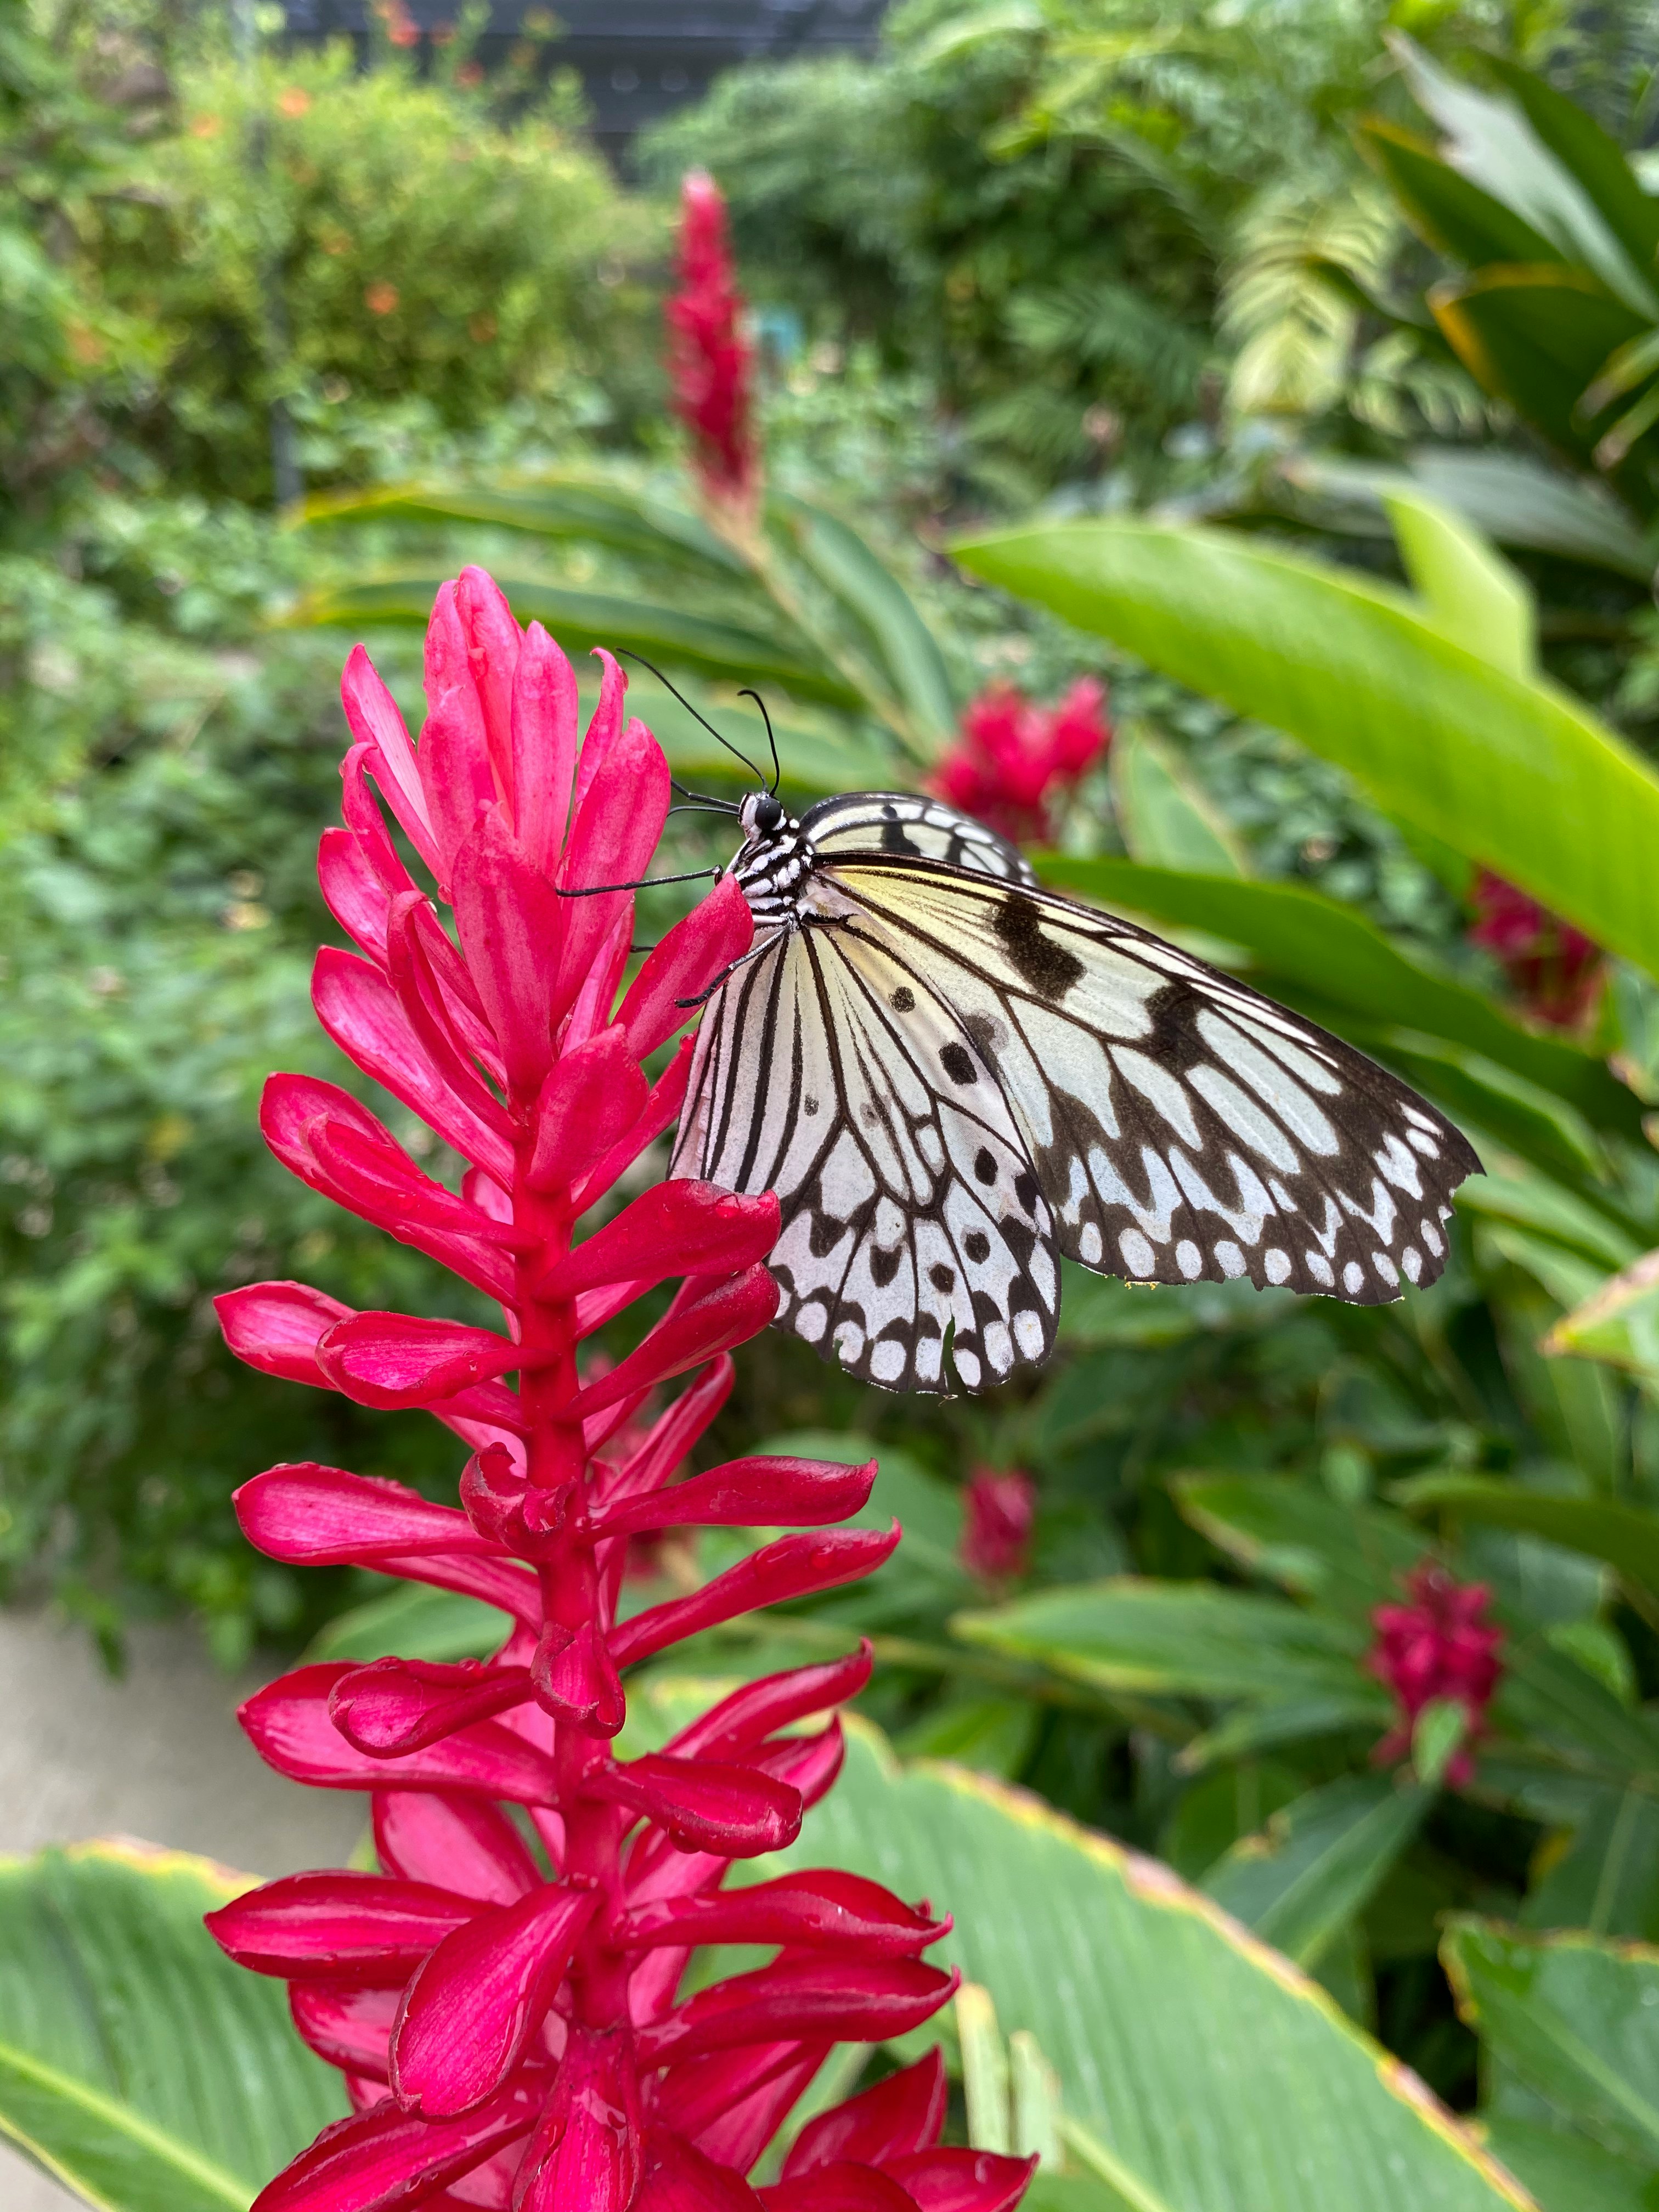 black and white butterfly on red flower during daytime